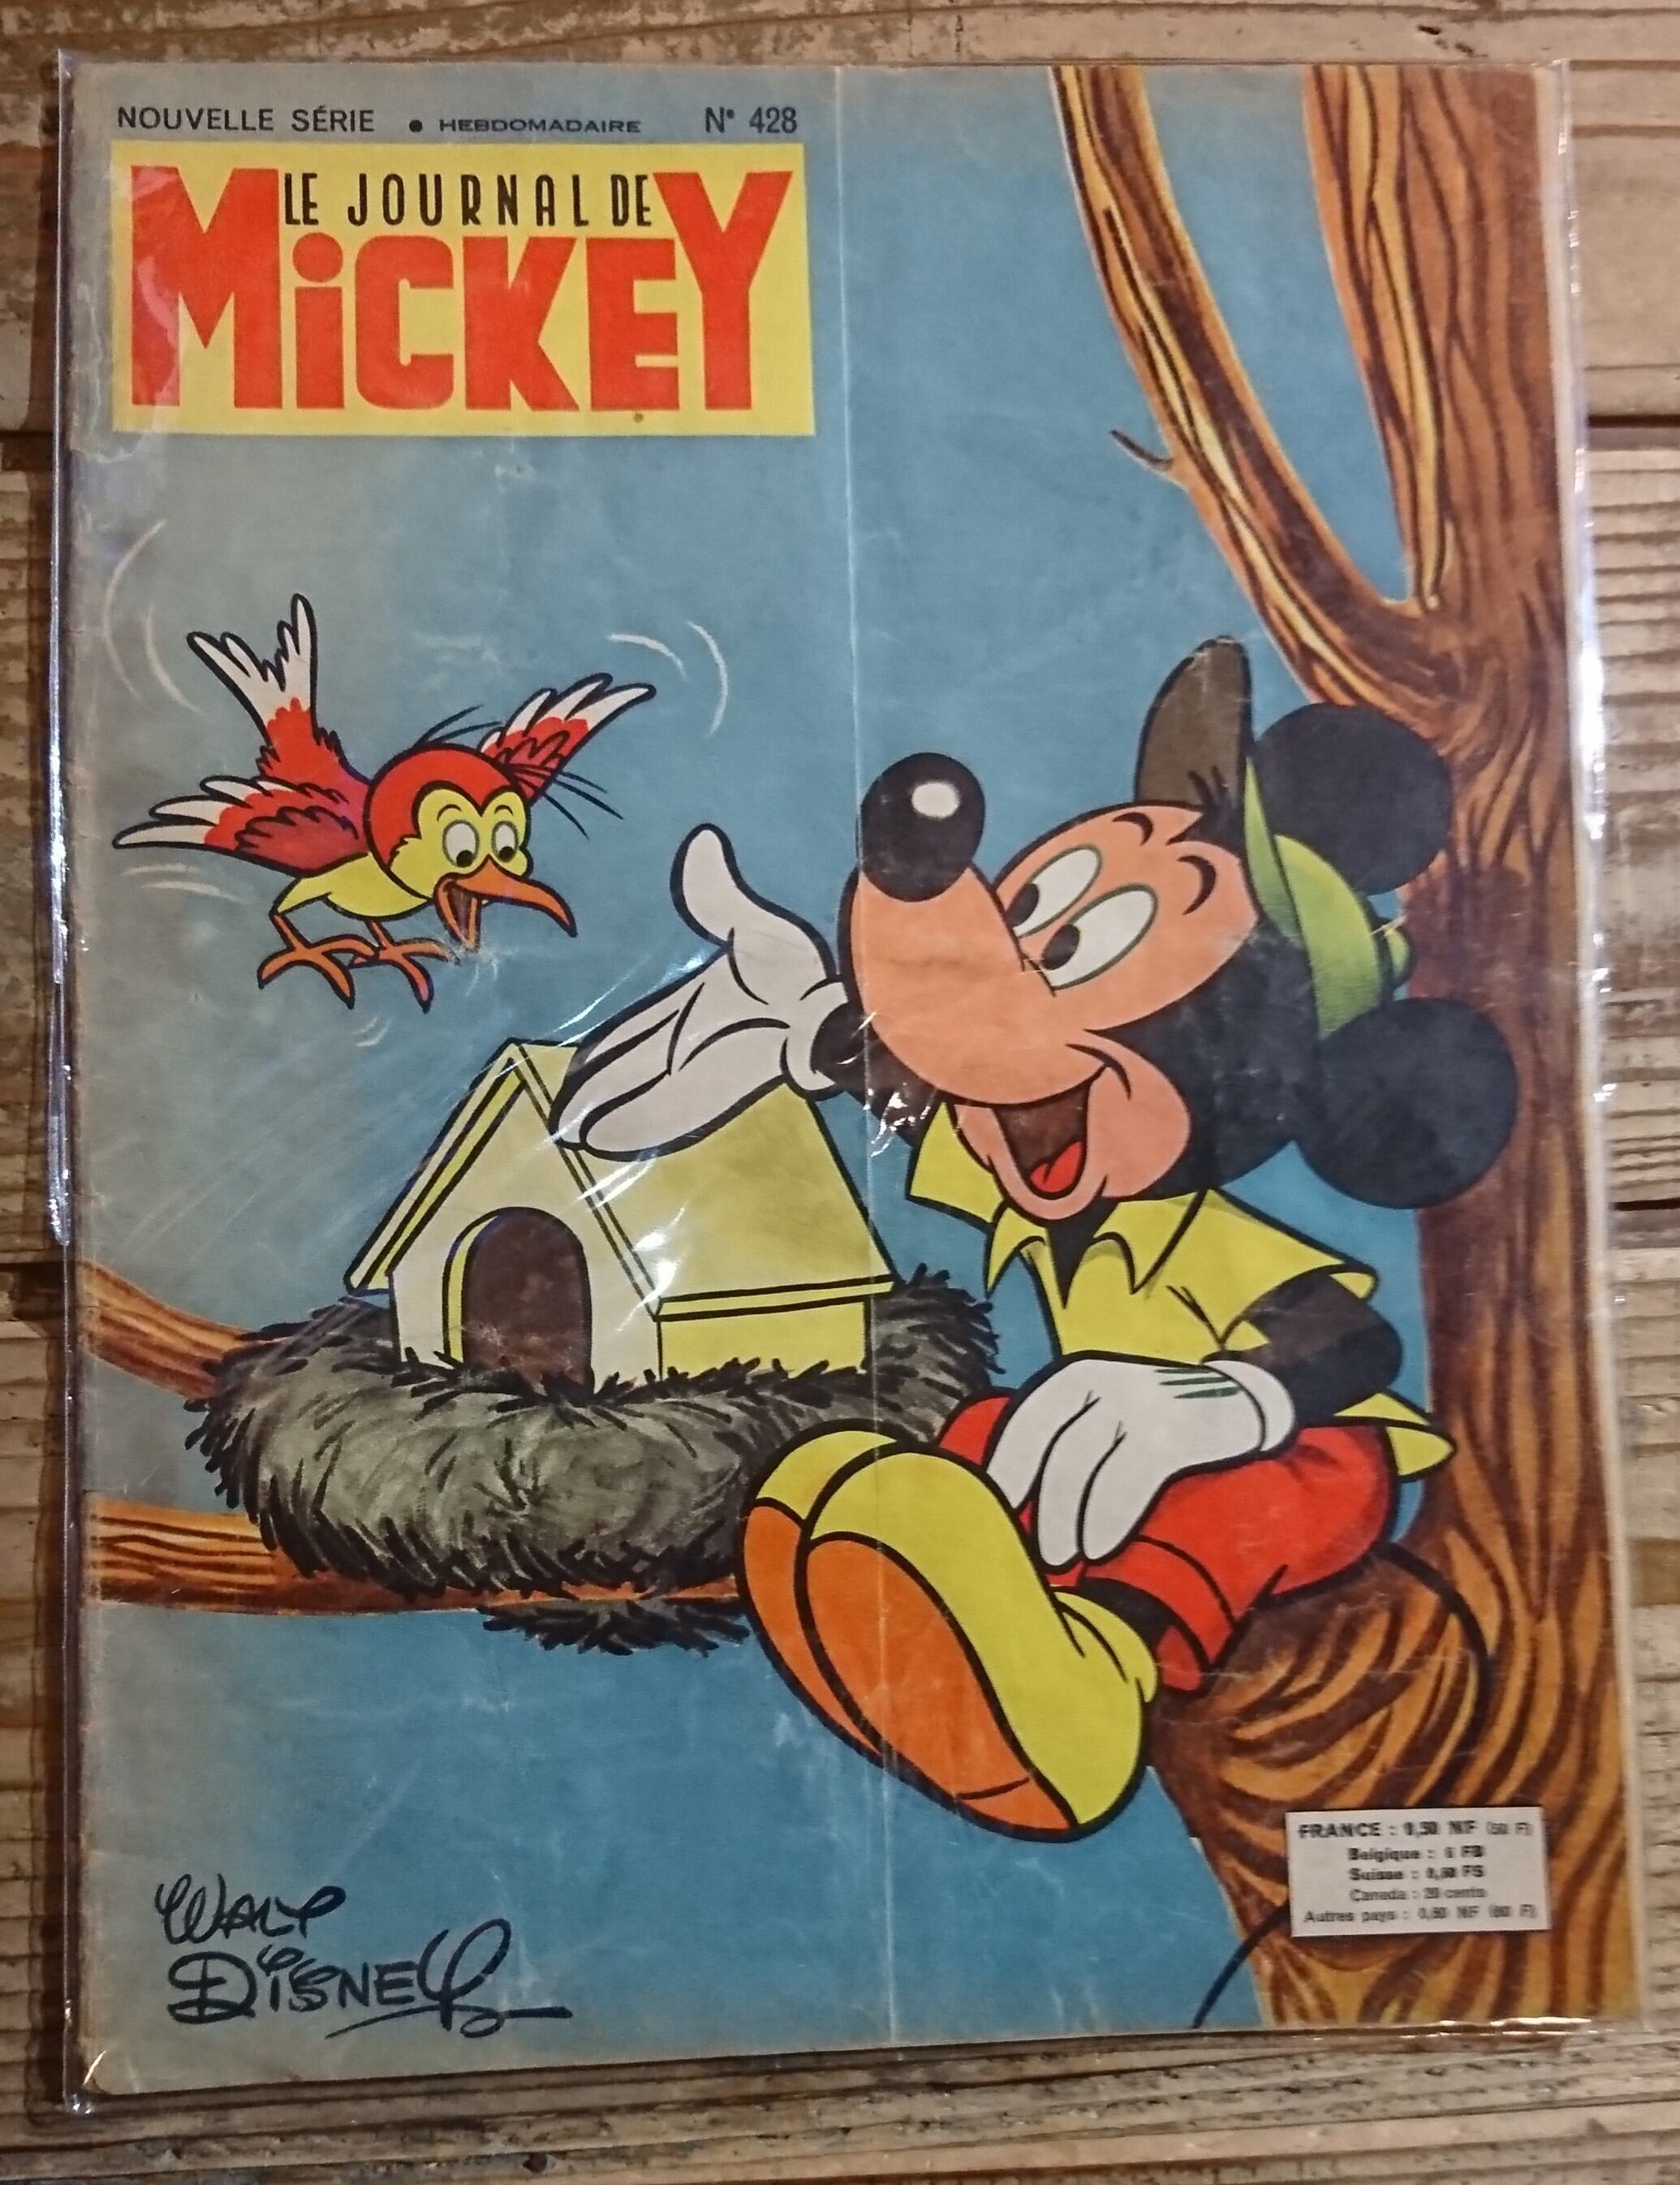 mickey journal 3冊セット 60s vintage ミッキージャーナル ミッキー